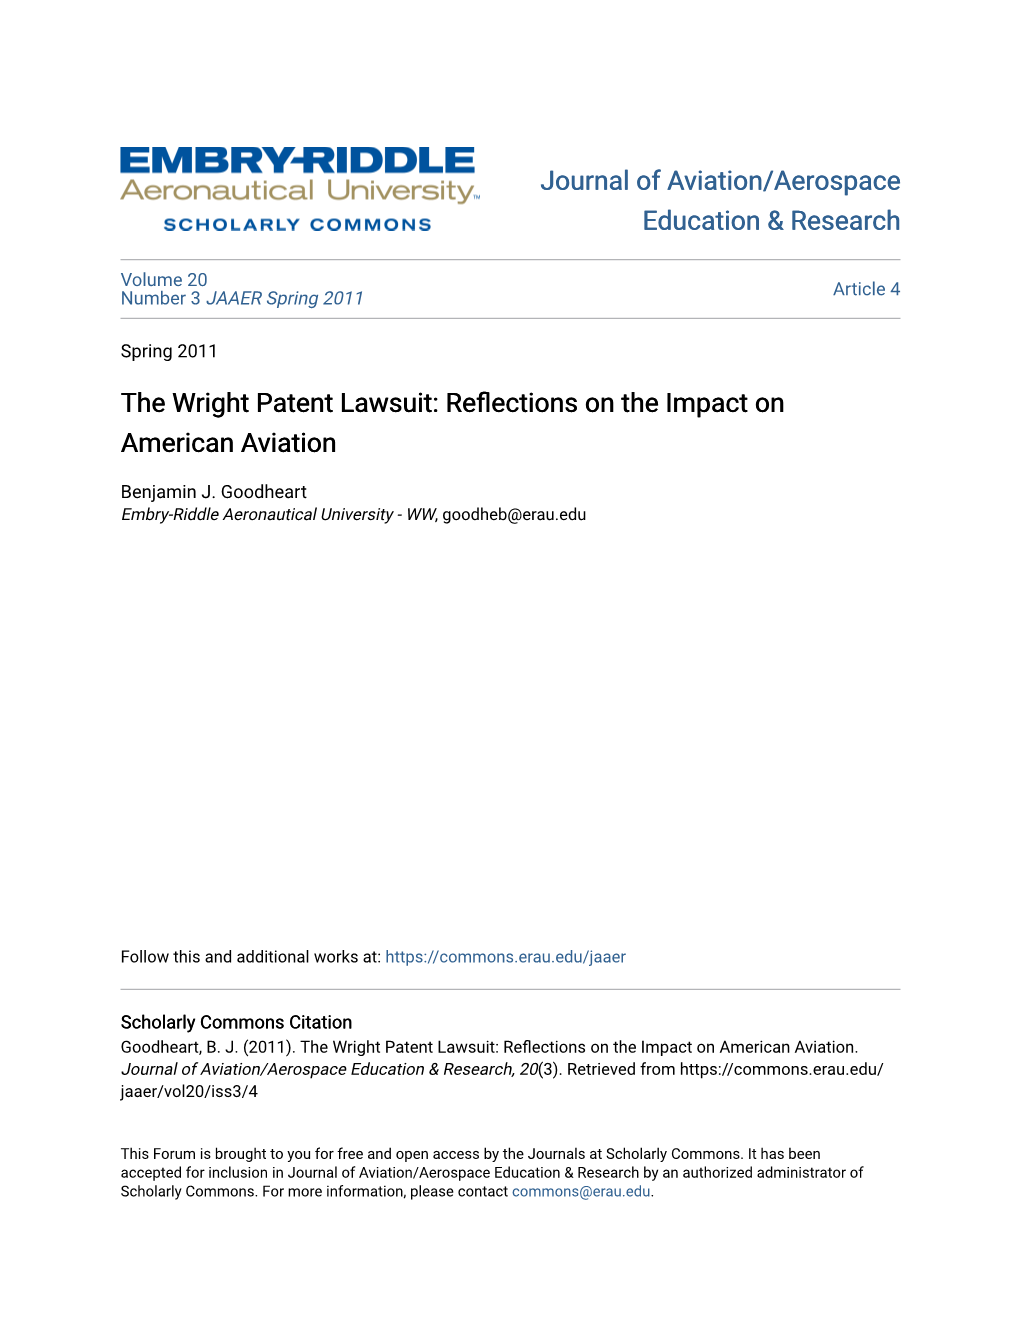 The Wright Patent Lawsuit: Reflections on the Impact on American Aviation